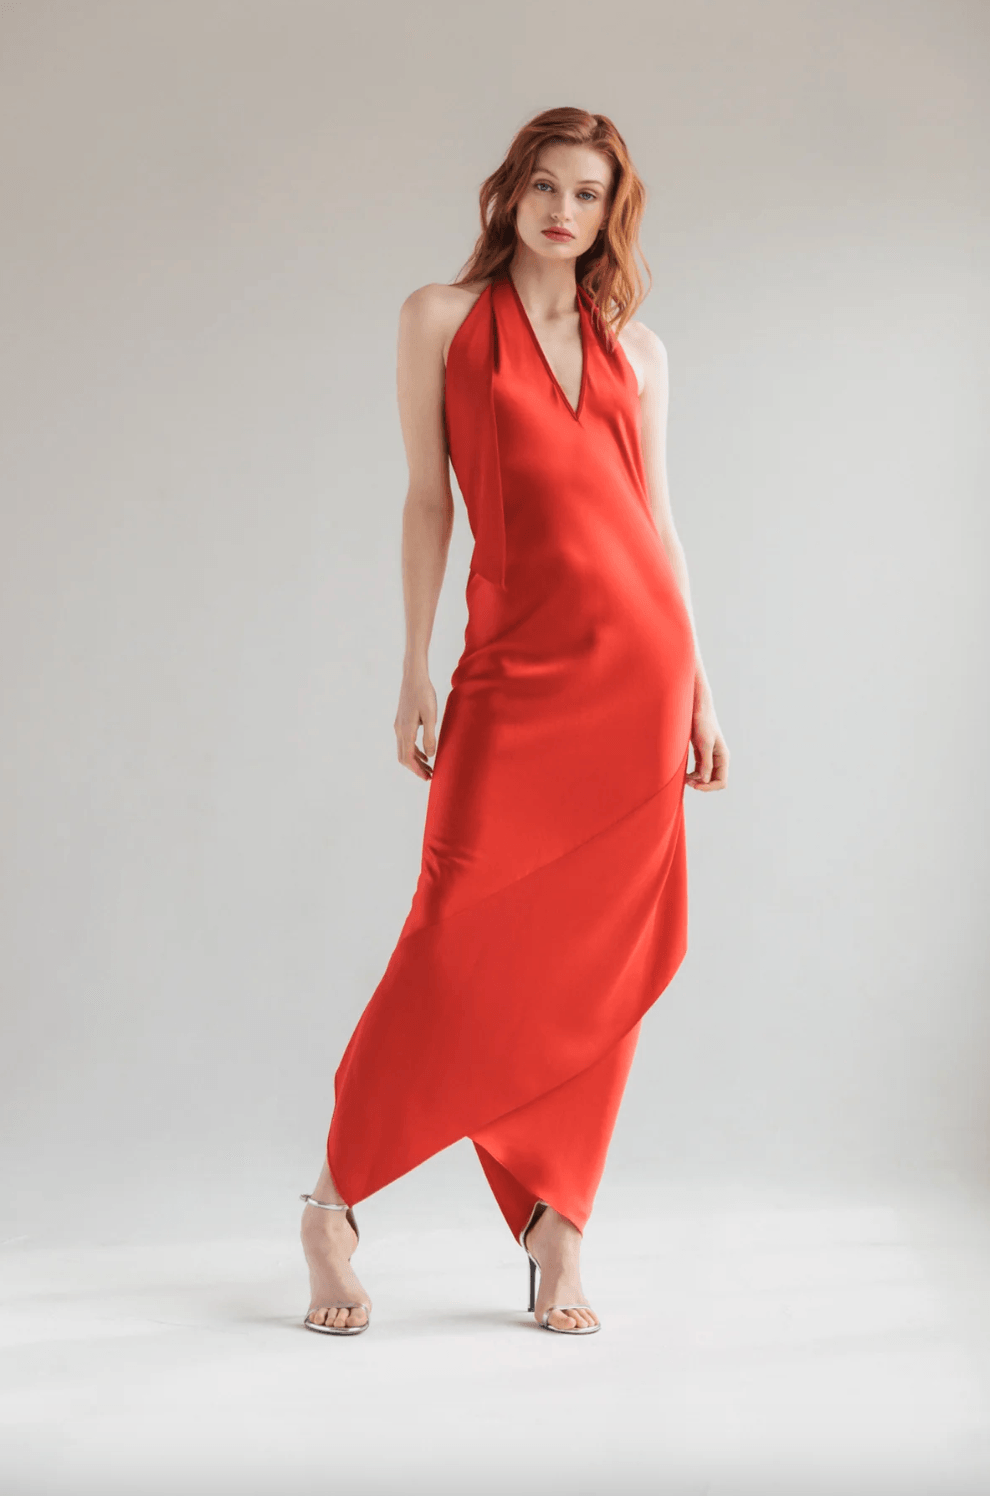 Diane Dress in High Risk Red by Catherine Gee - Haven